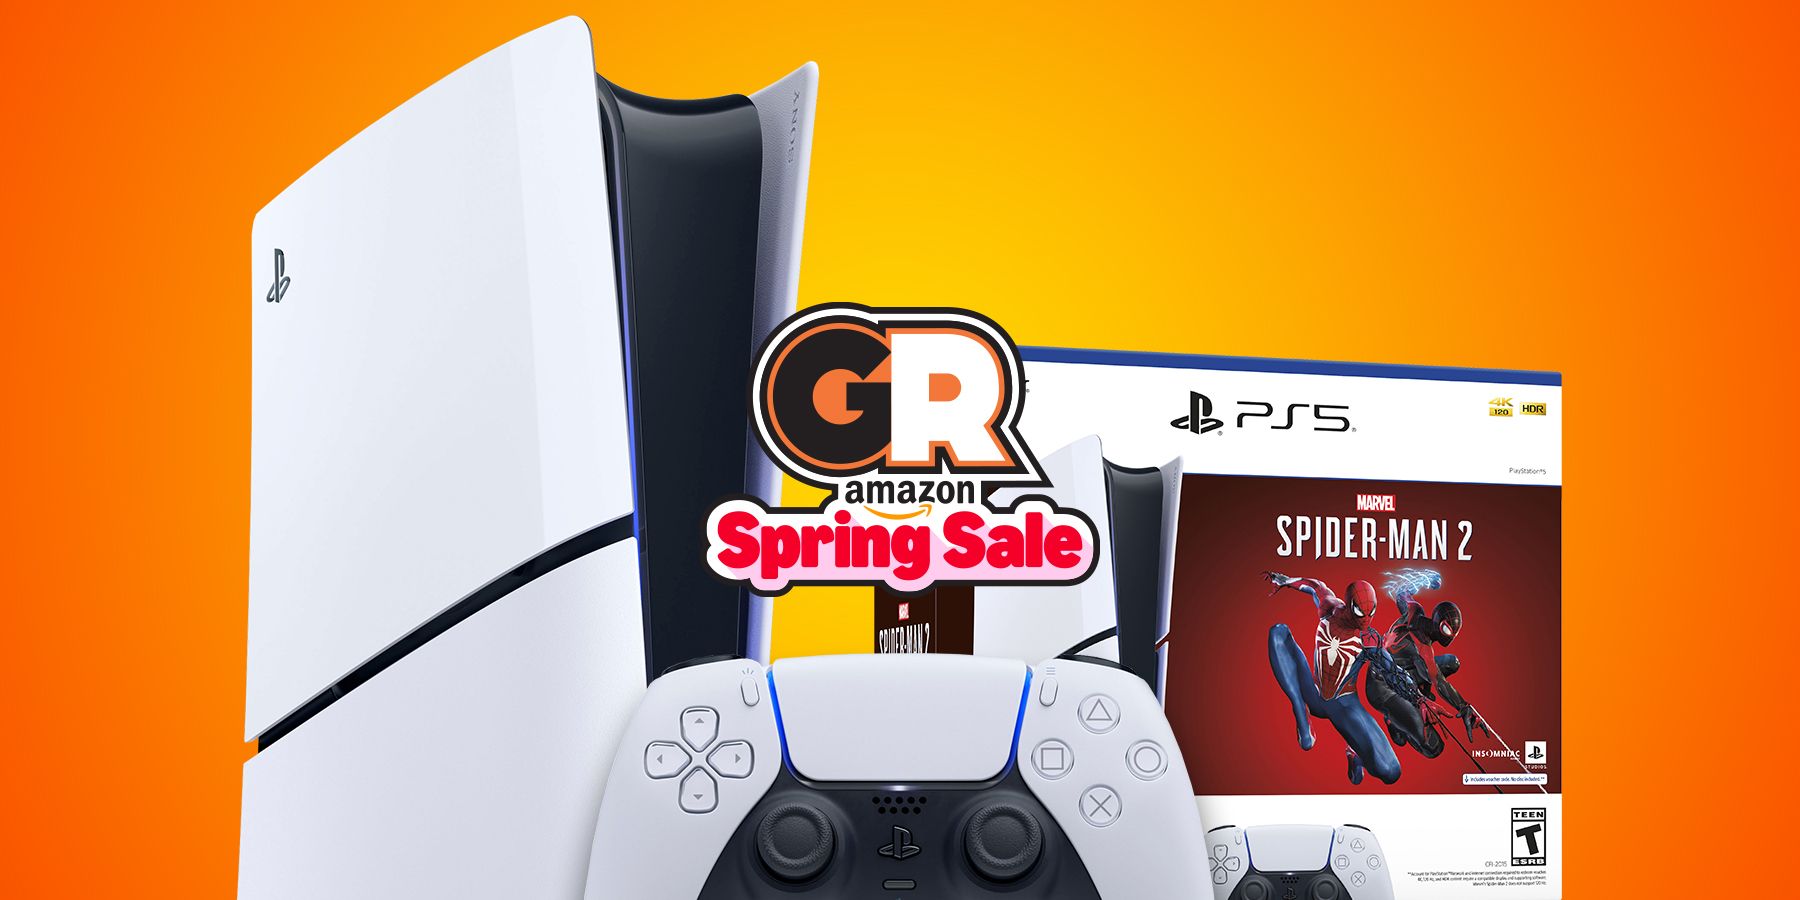  Should You Buy a PS5 during the Amazon Spring Sale?